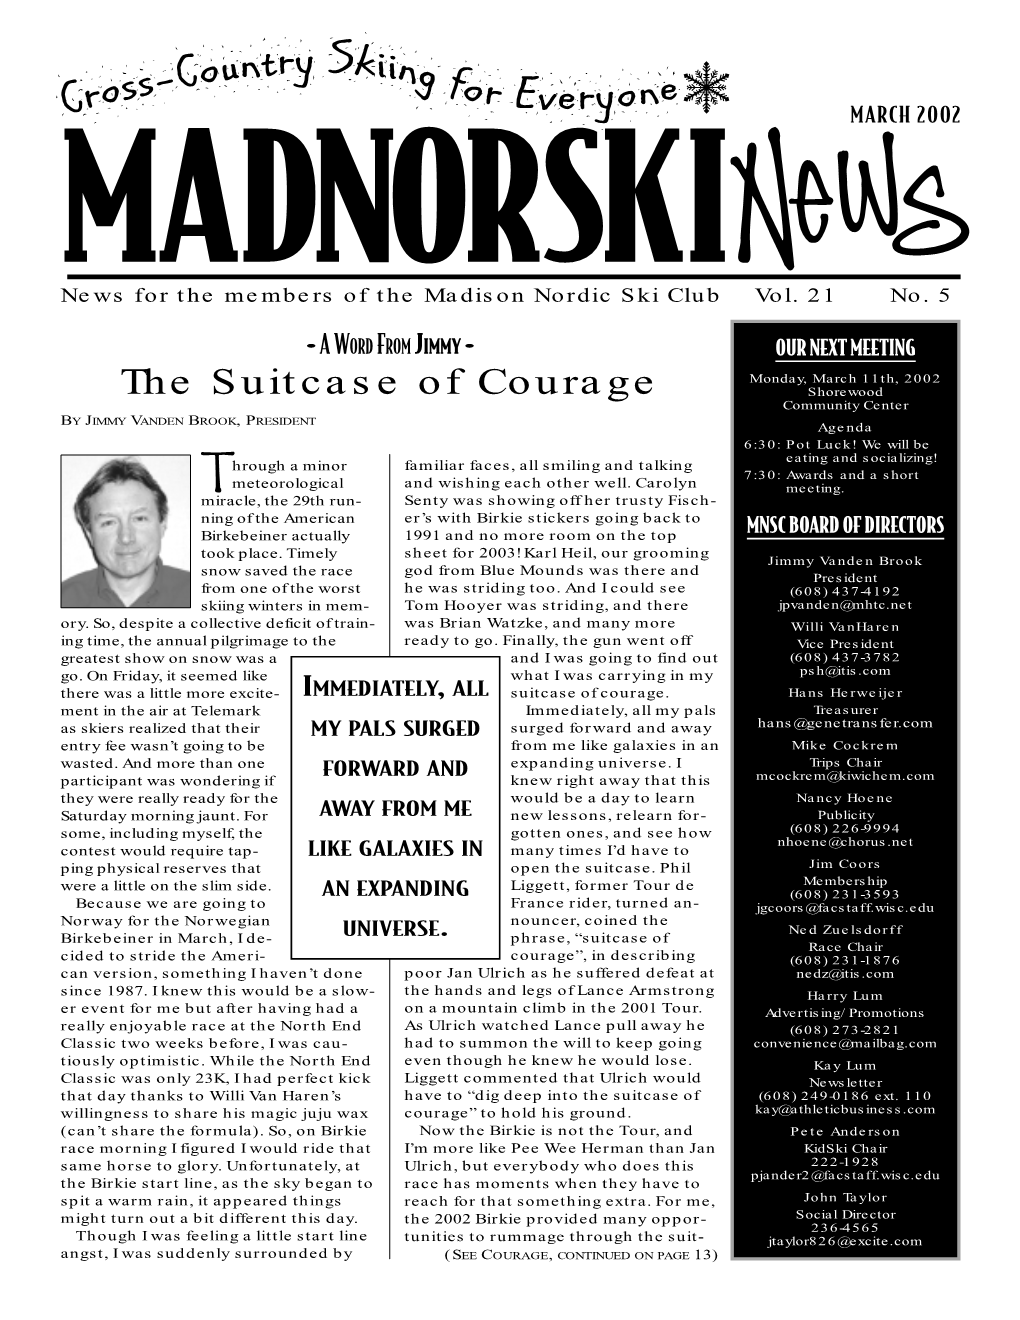 Madnorskinews, March 2002